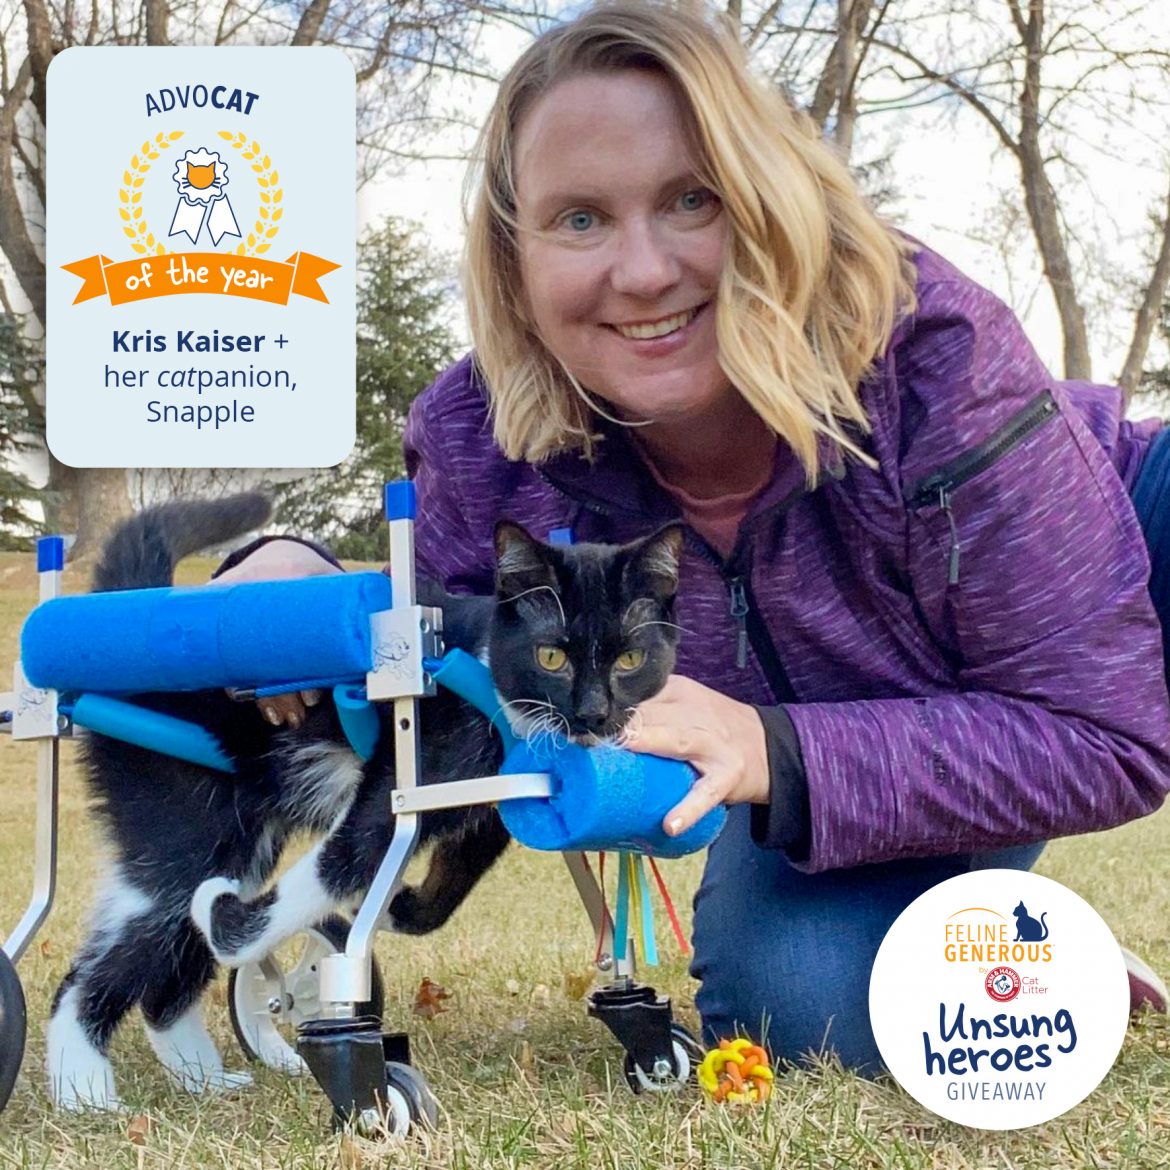 The ARM & HAMMER™ Feline Generous Program Announces the Winners of its Unsung Heroes Awards